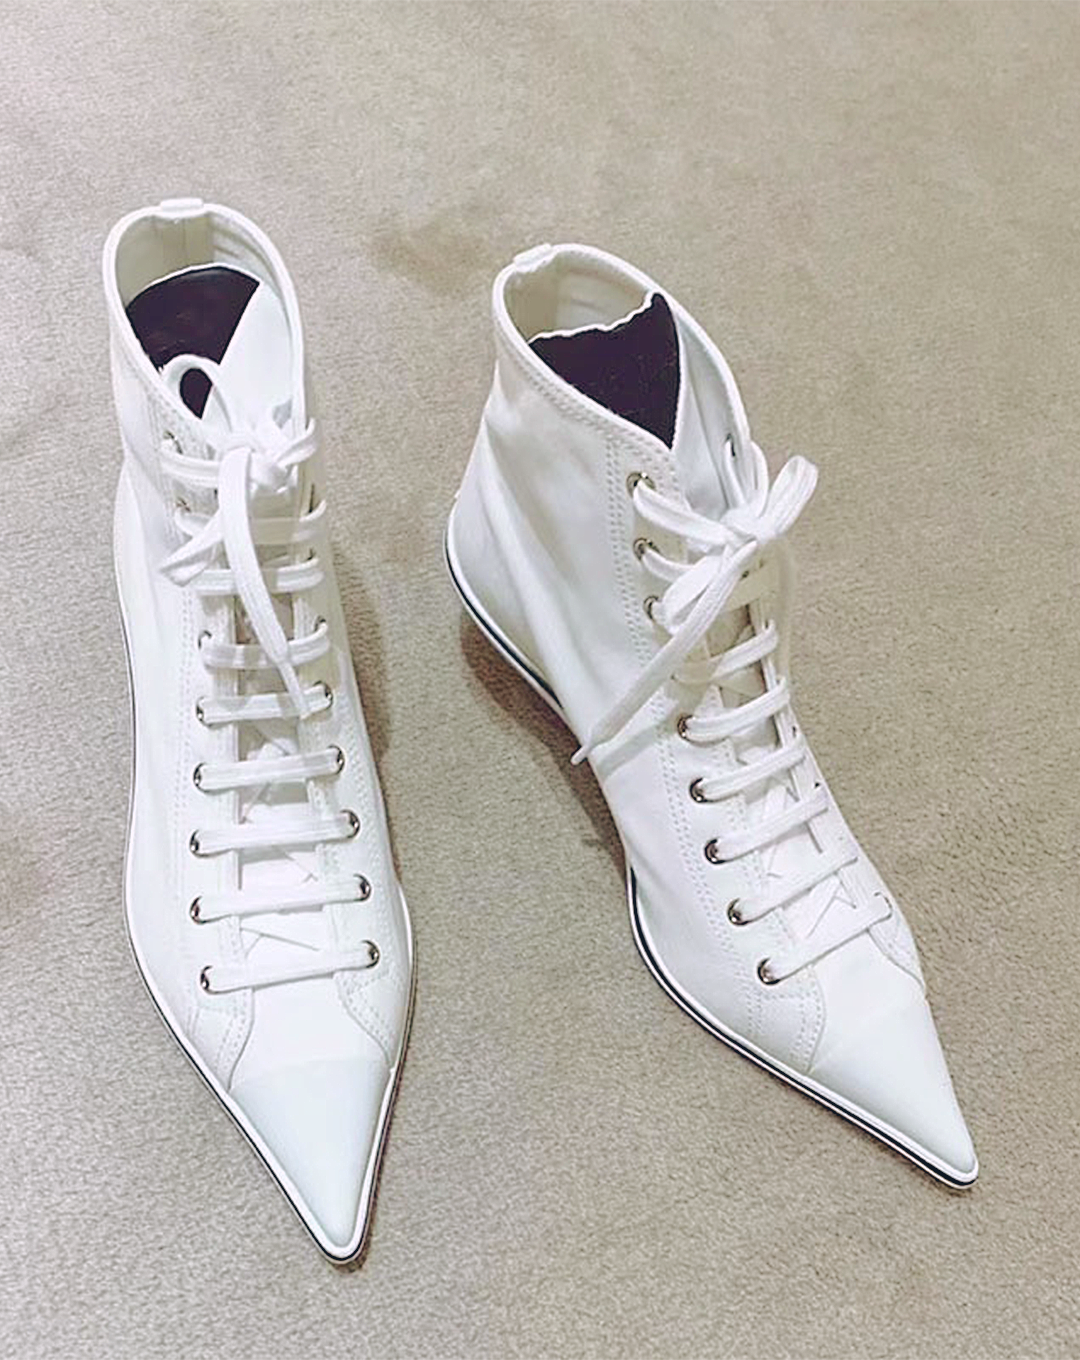 ♀Sneaker Style Pointed Toe Shoes